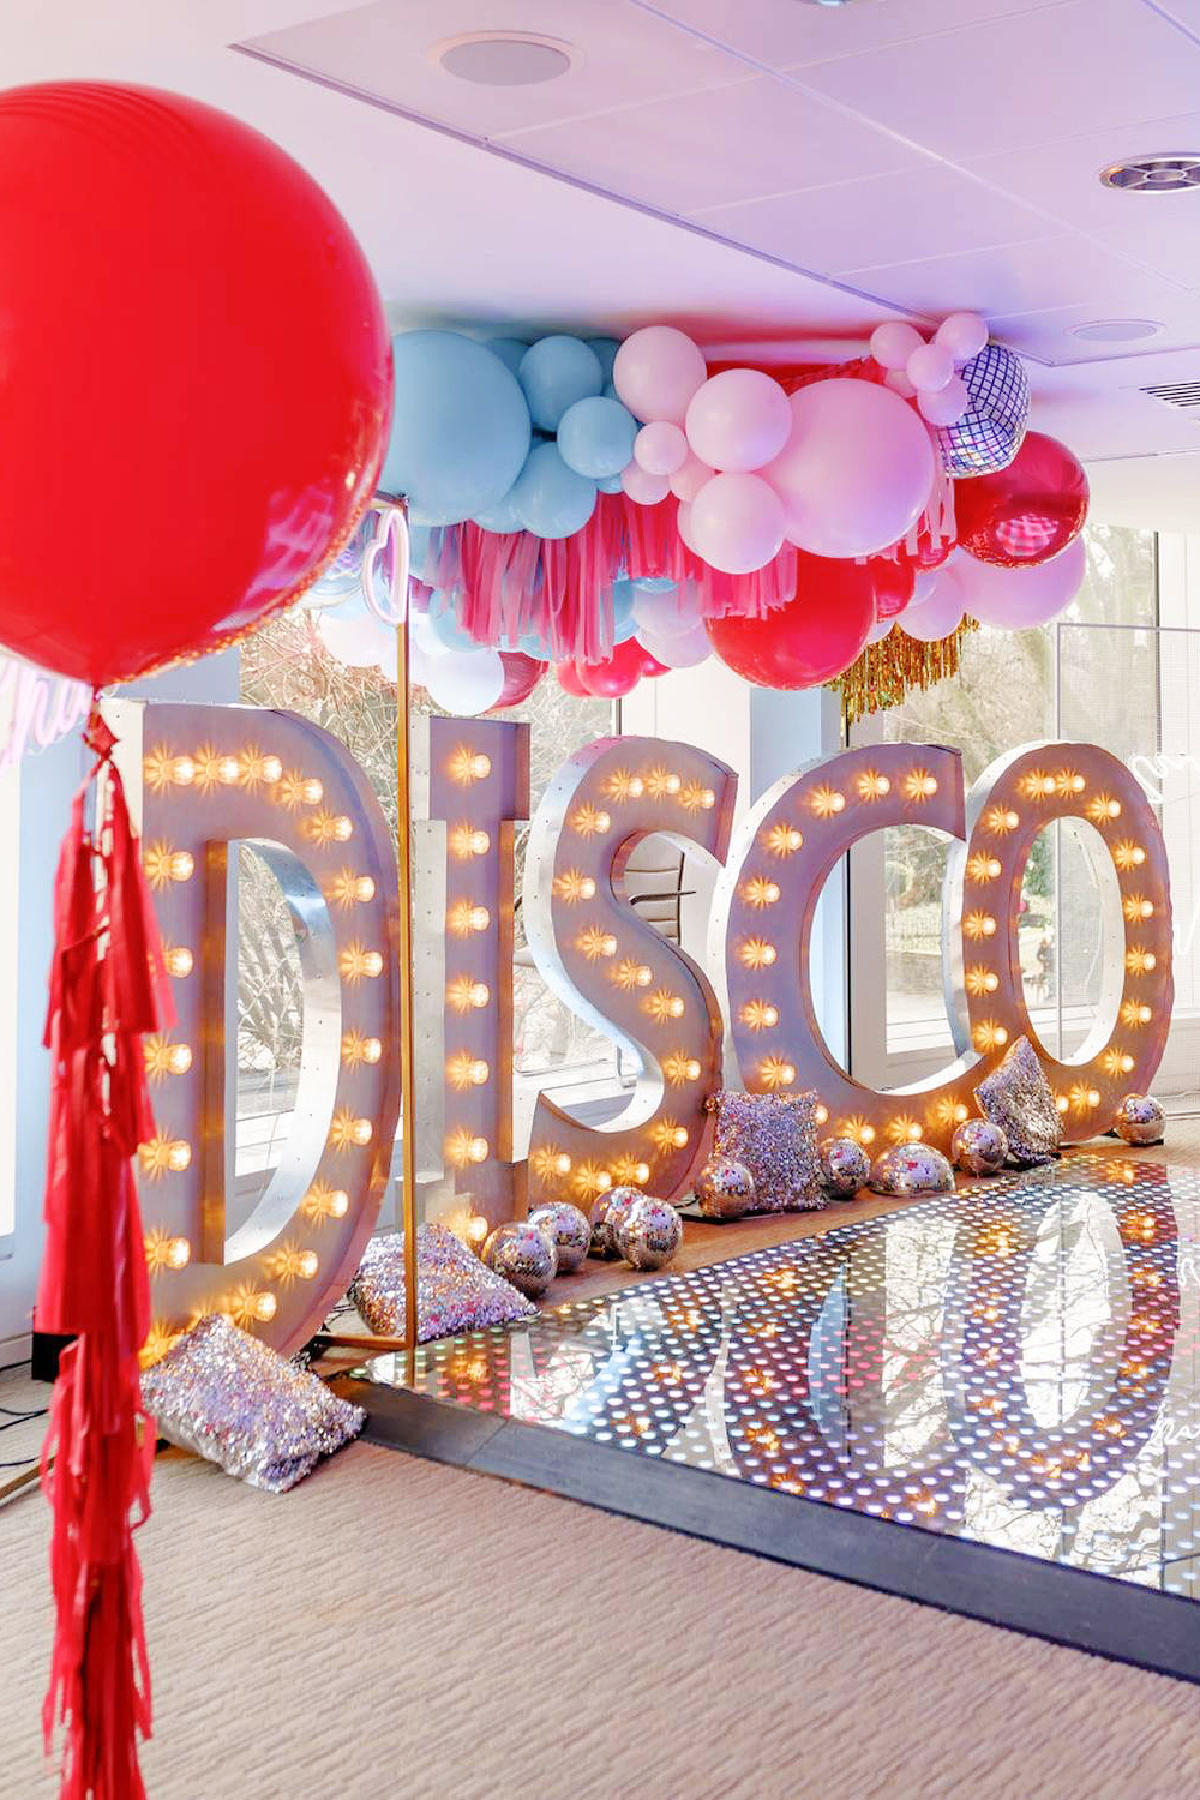 Best Party Themes for Adults - Disco Parties